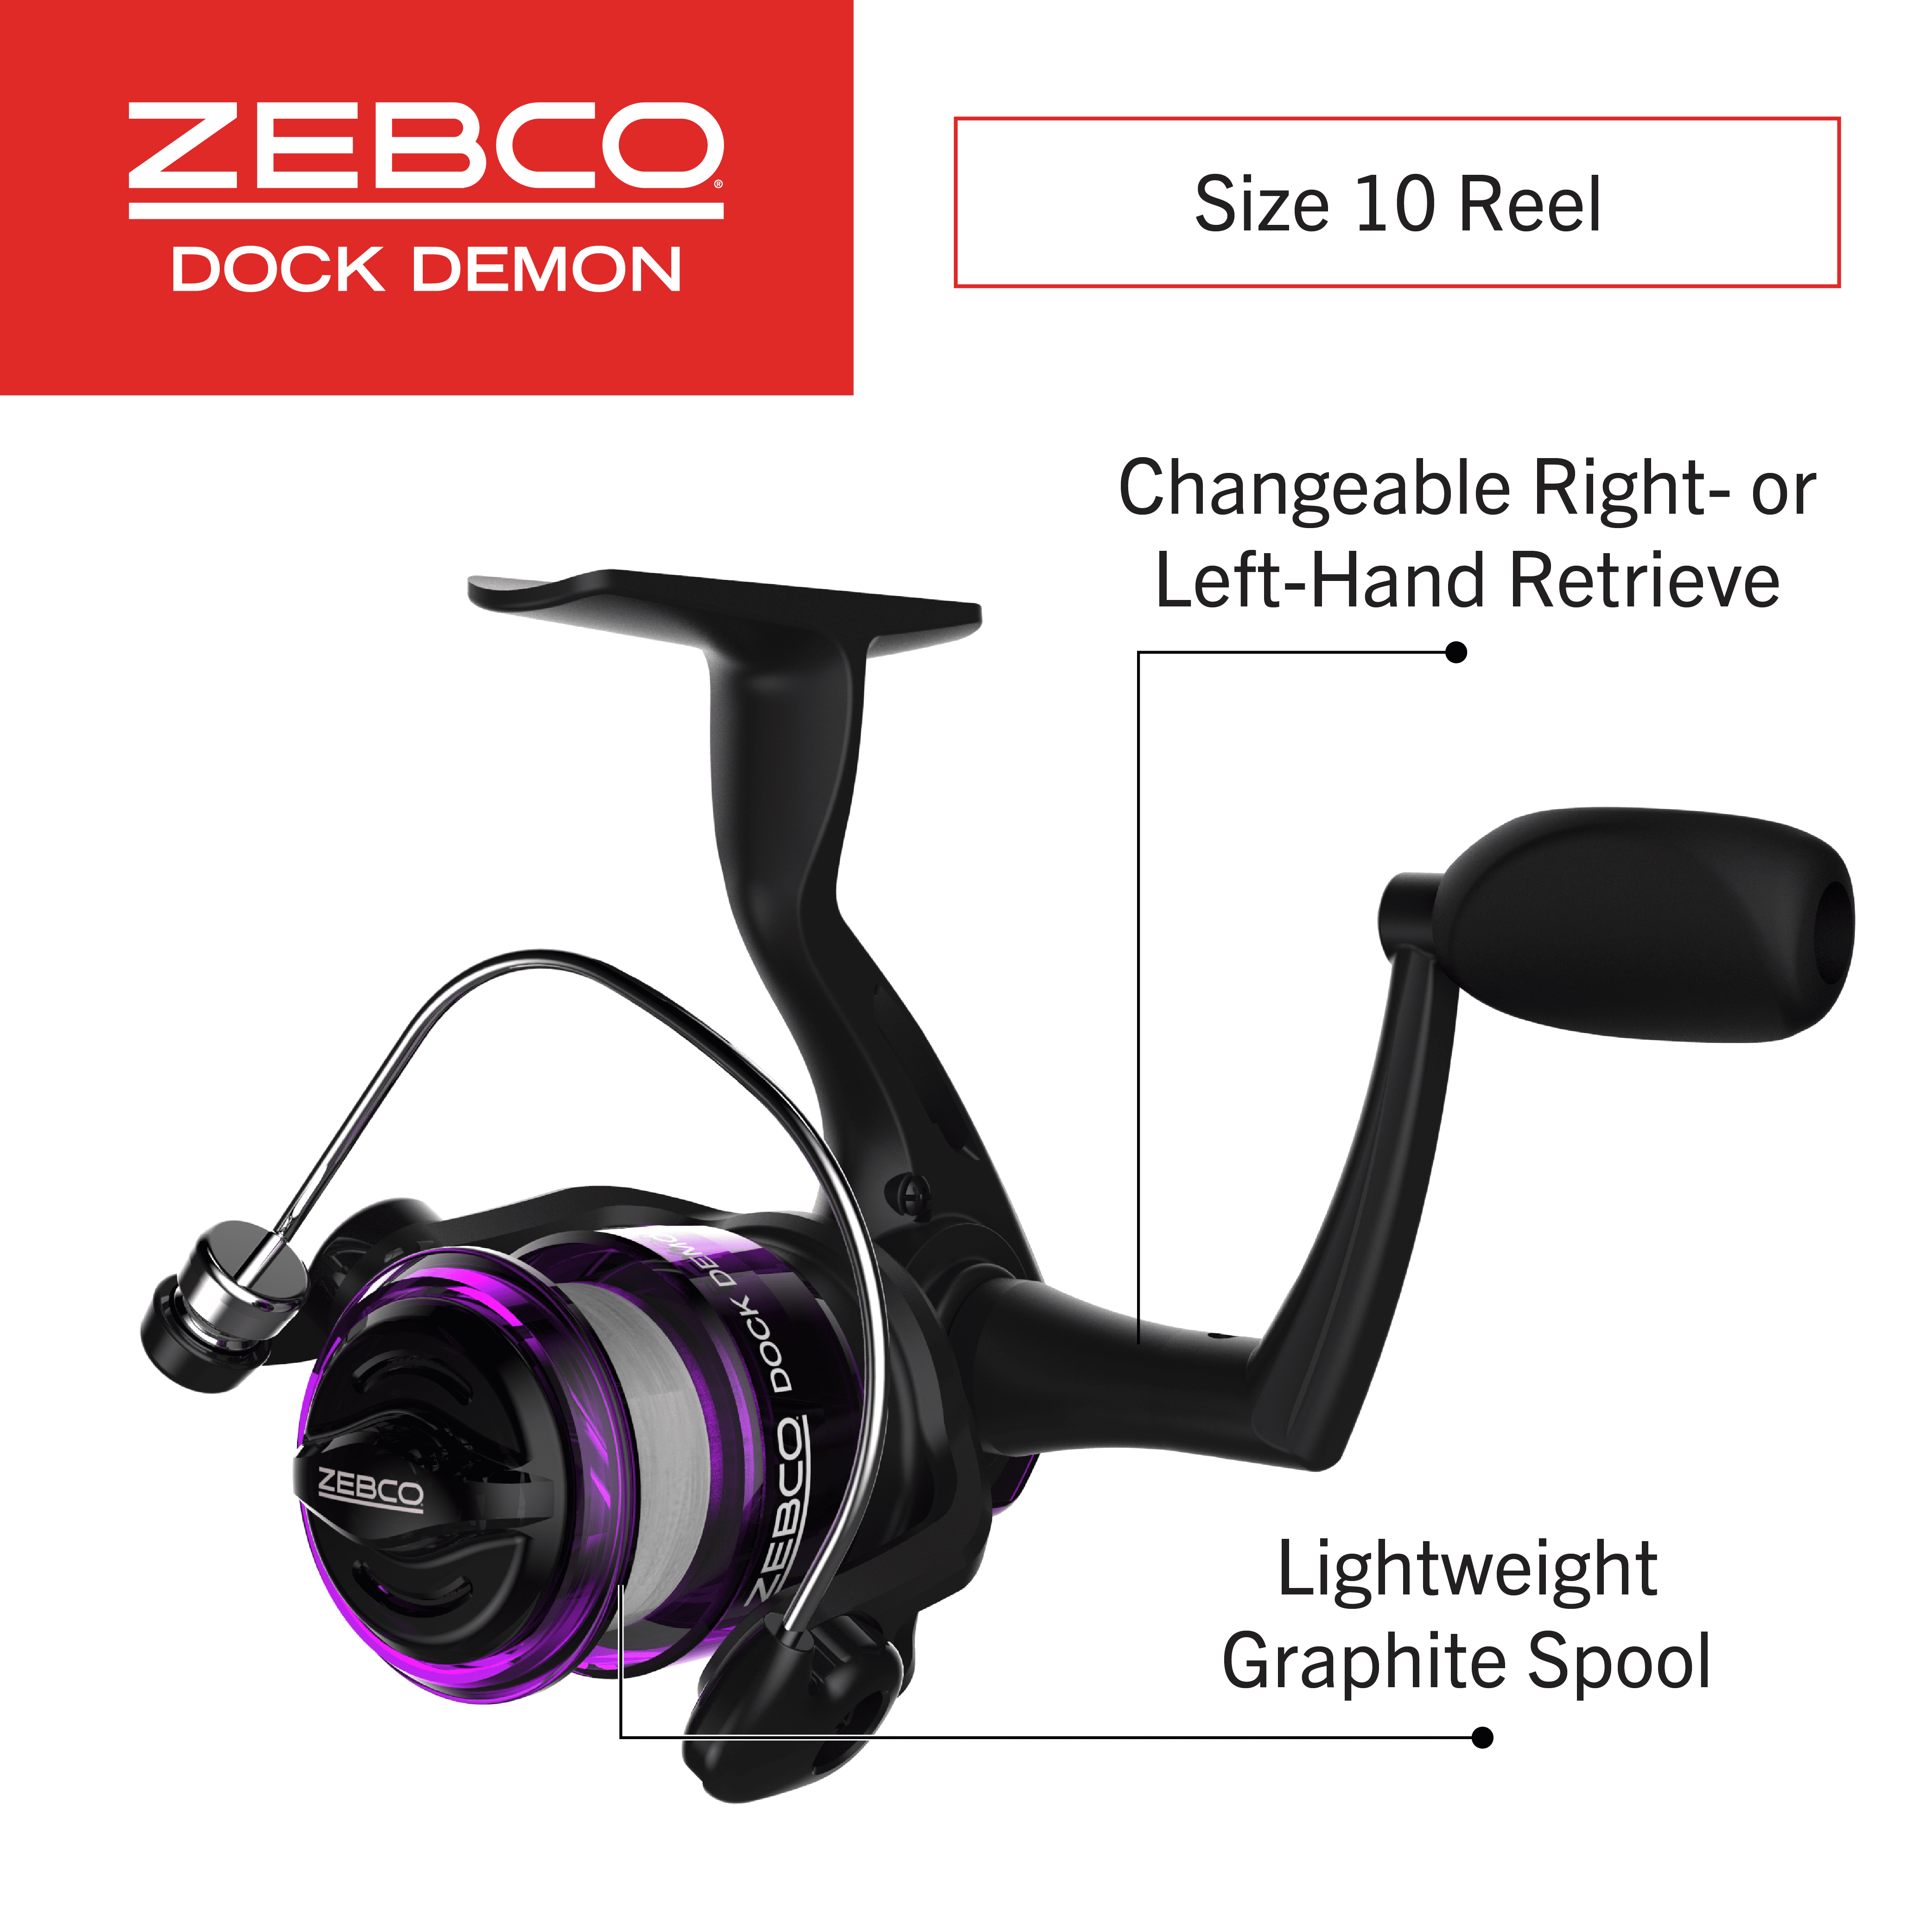 Zebco Dock Demon Extremely Tough Solid Fiberglass Rod Construction All Metal 